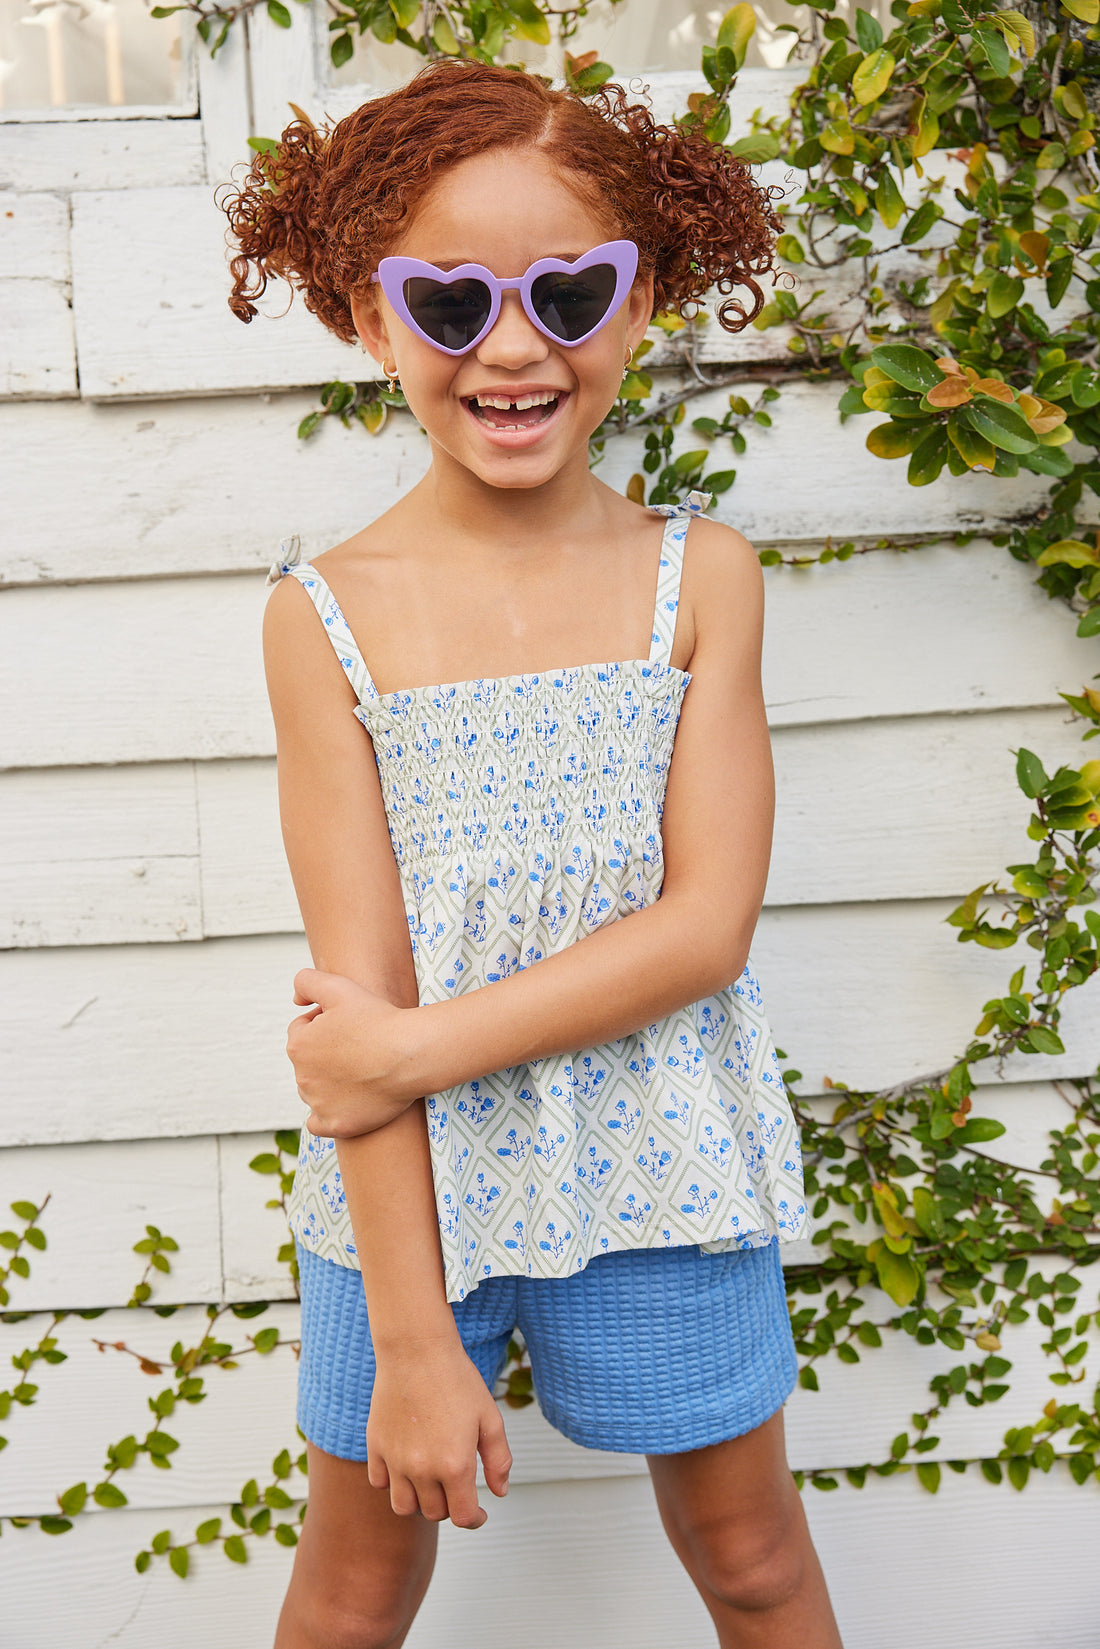 BISBY girl rocking our new Lucy Top in Vintage Azur which features a beautiful blue and green floral pattern. This top has fixed ties on the straps for an elevated look and also has ruching across the bust. 